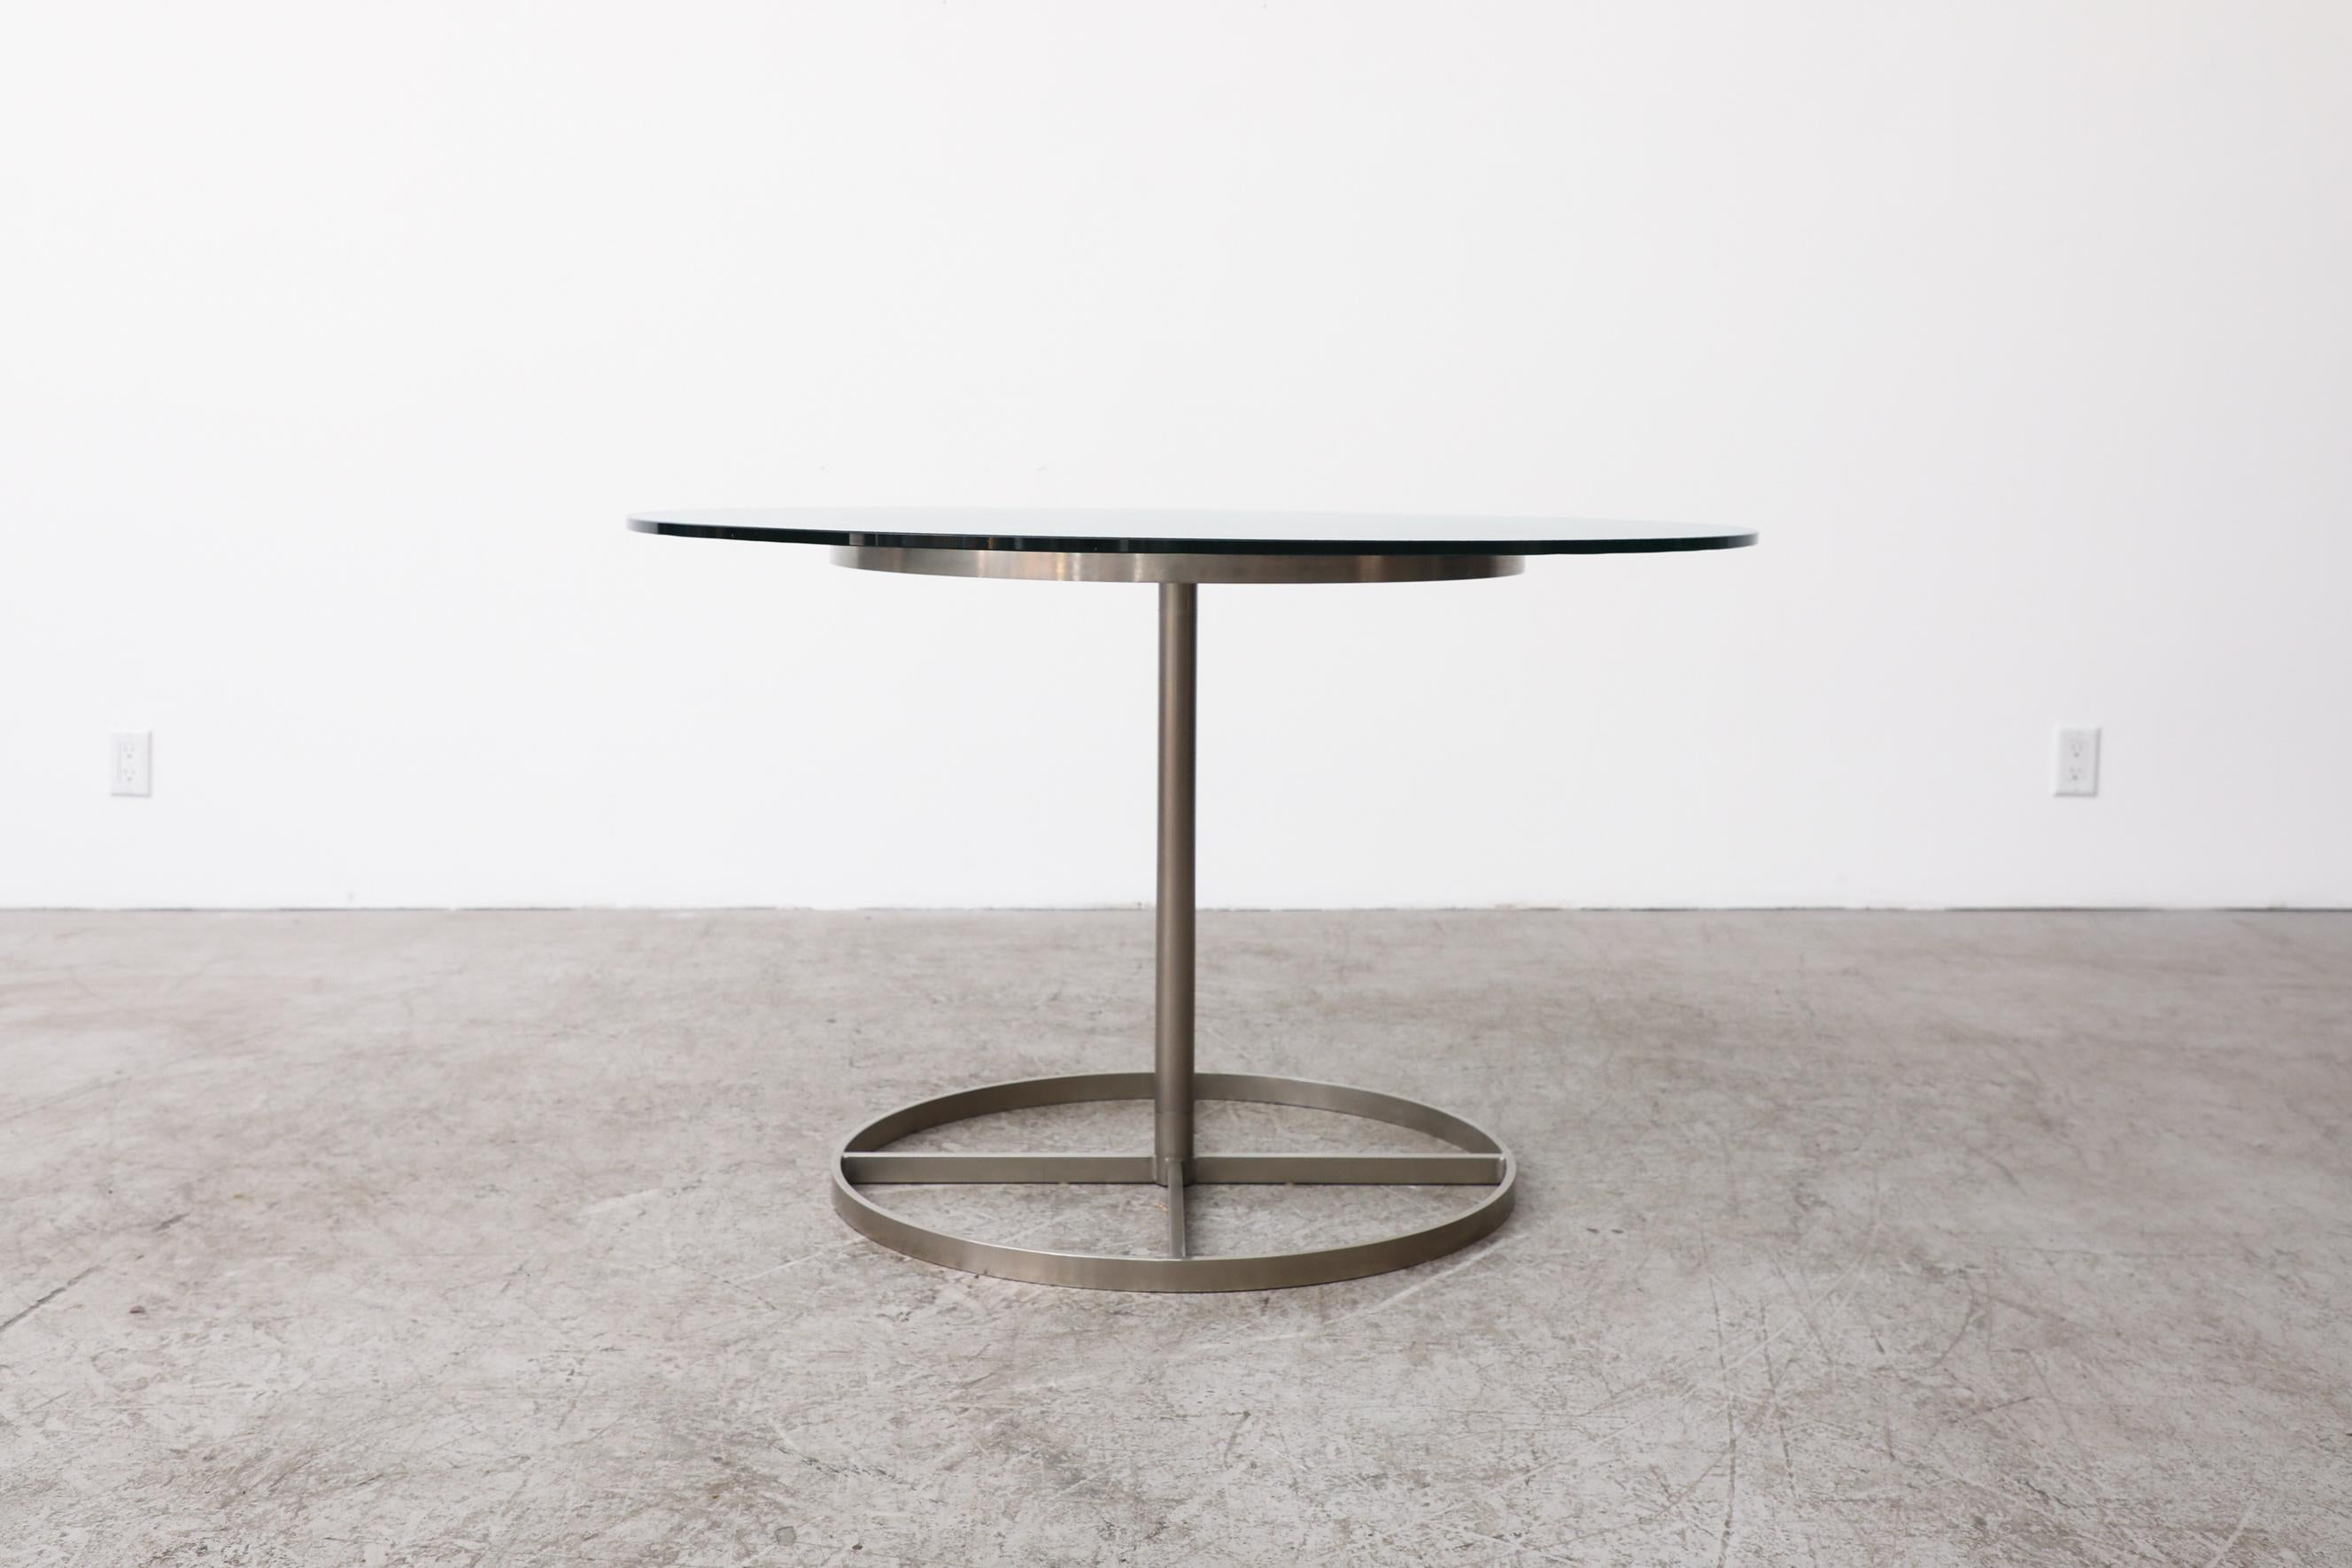 This round dining table has a solid steel base with x design inside and textured glass top. In original condition with visible wear consistent with its age and use.